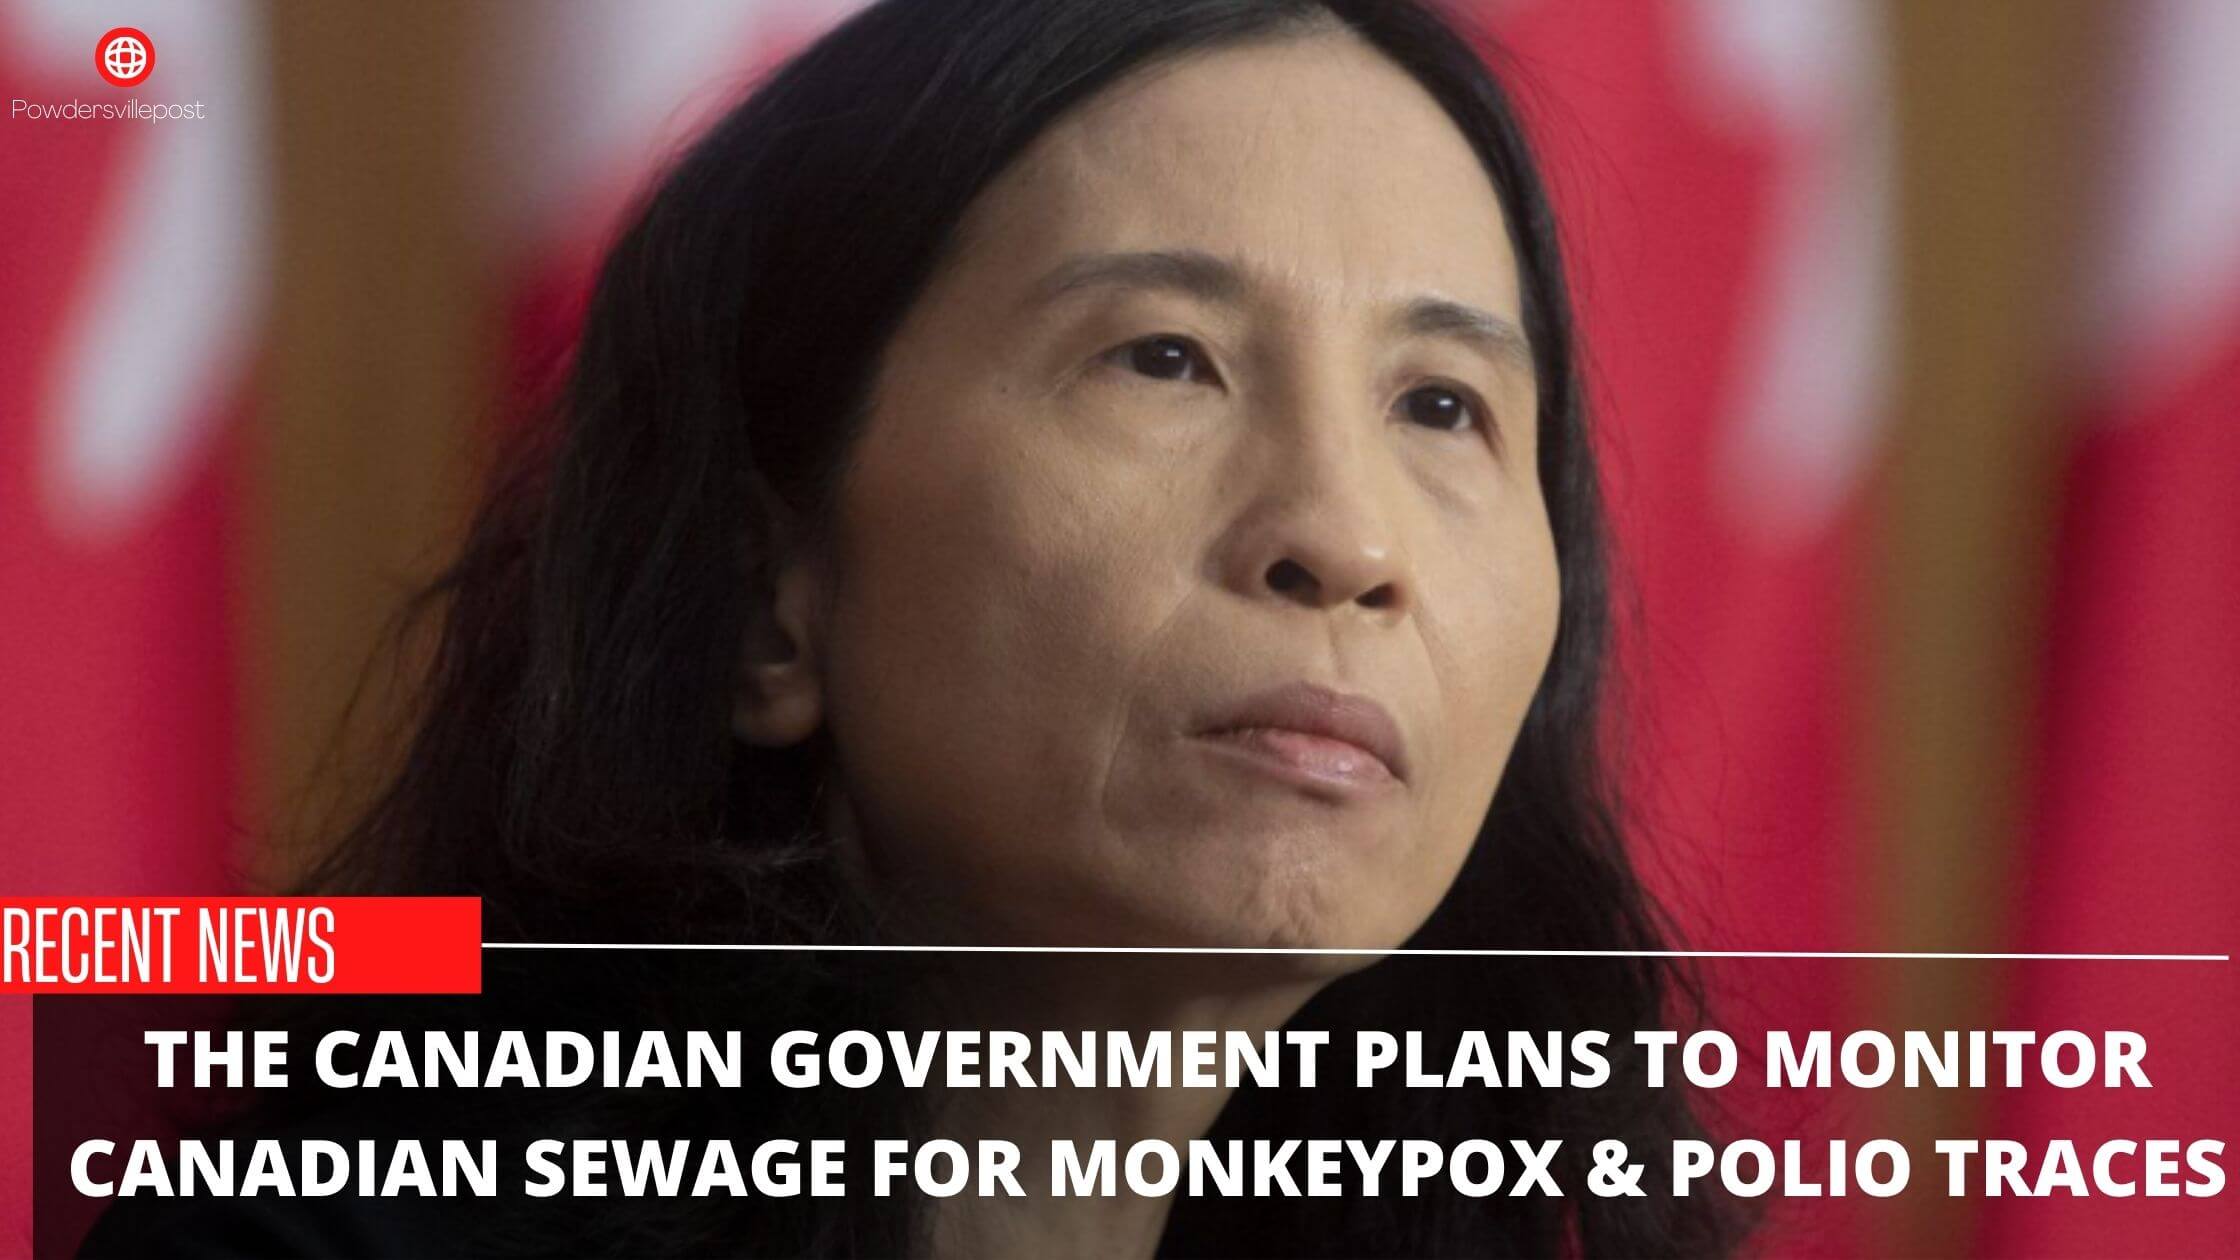 The Canadian Government Plans To Monitor Canadian Sewage For Monkeypox, Polio Traces